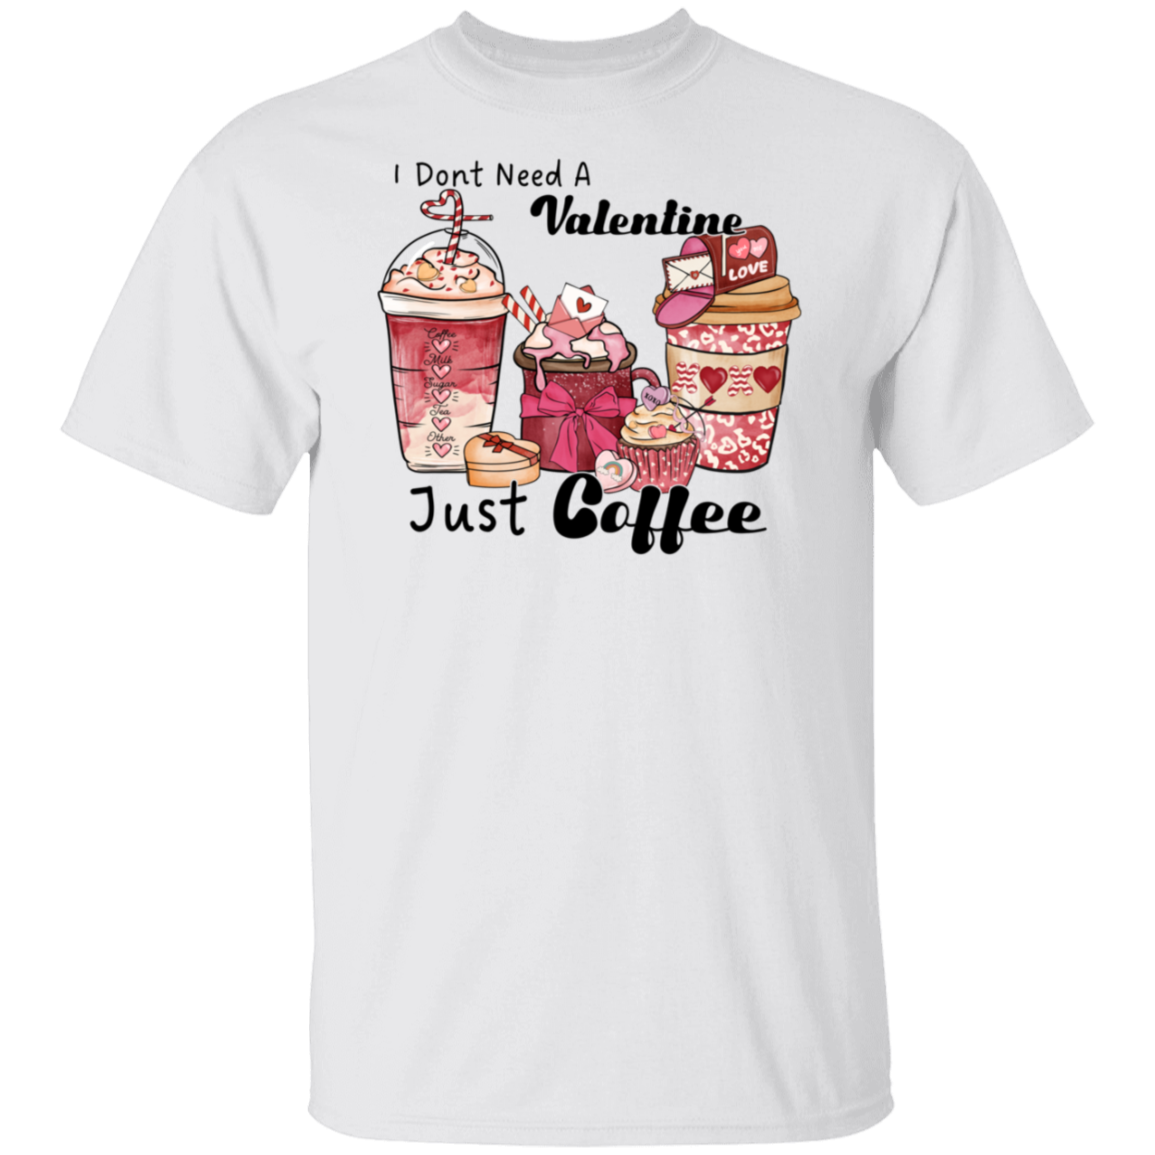 Just Coffee T-Shirt